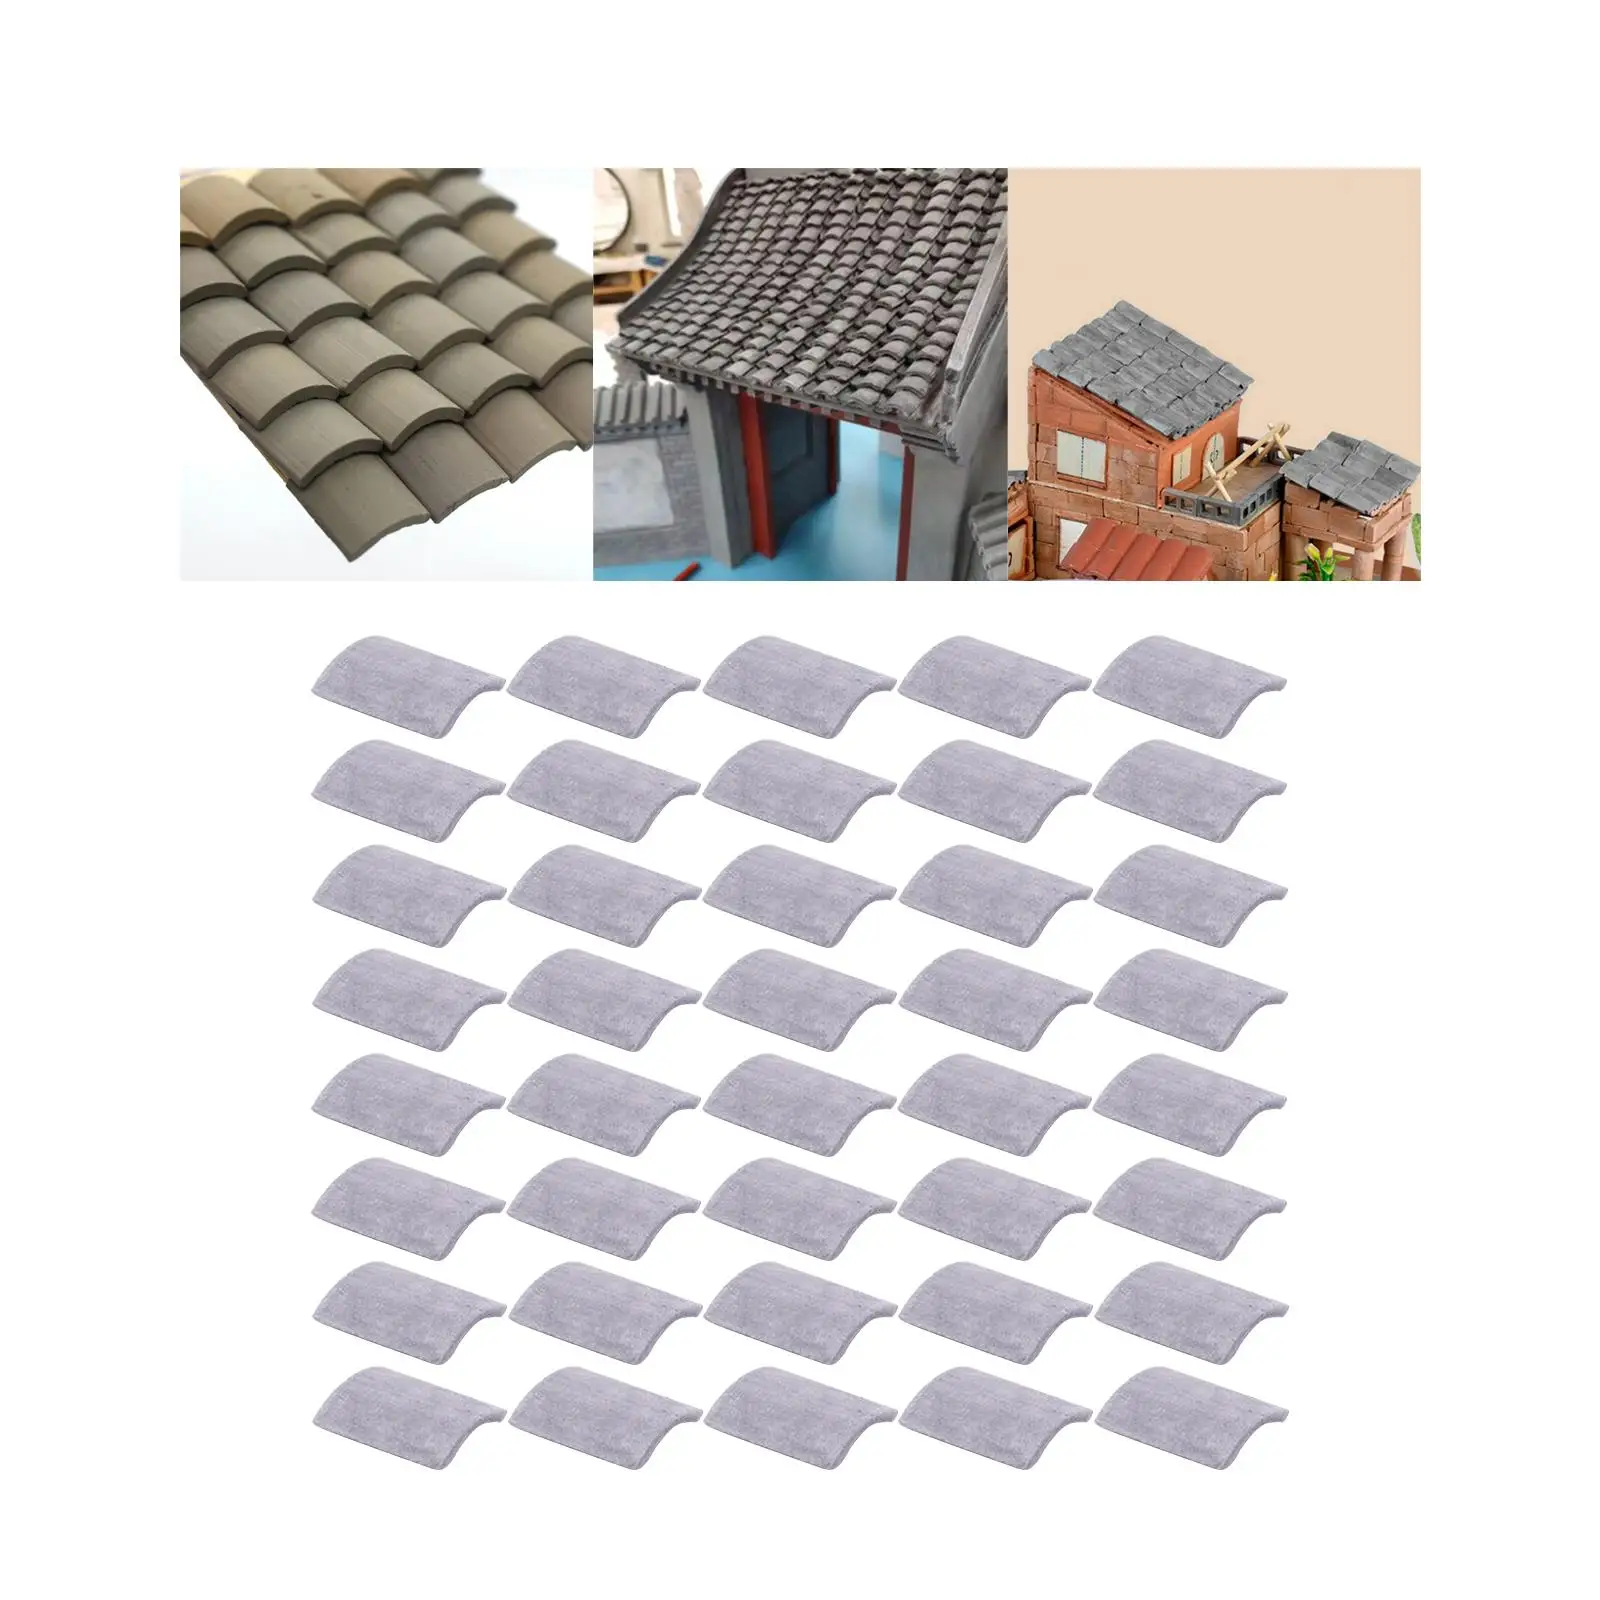 Grey Roof Tiles Model Building Set Grey Wall Bricks for Dollhouses Life Scene Props Toys